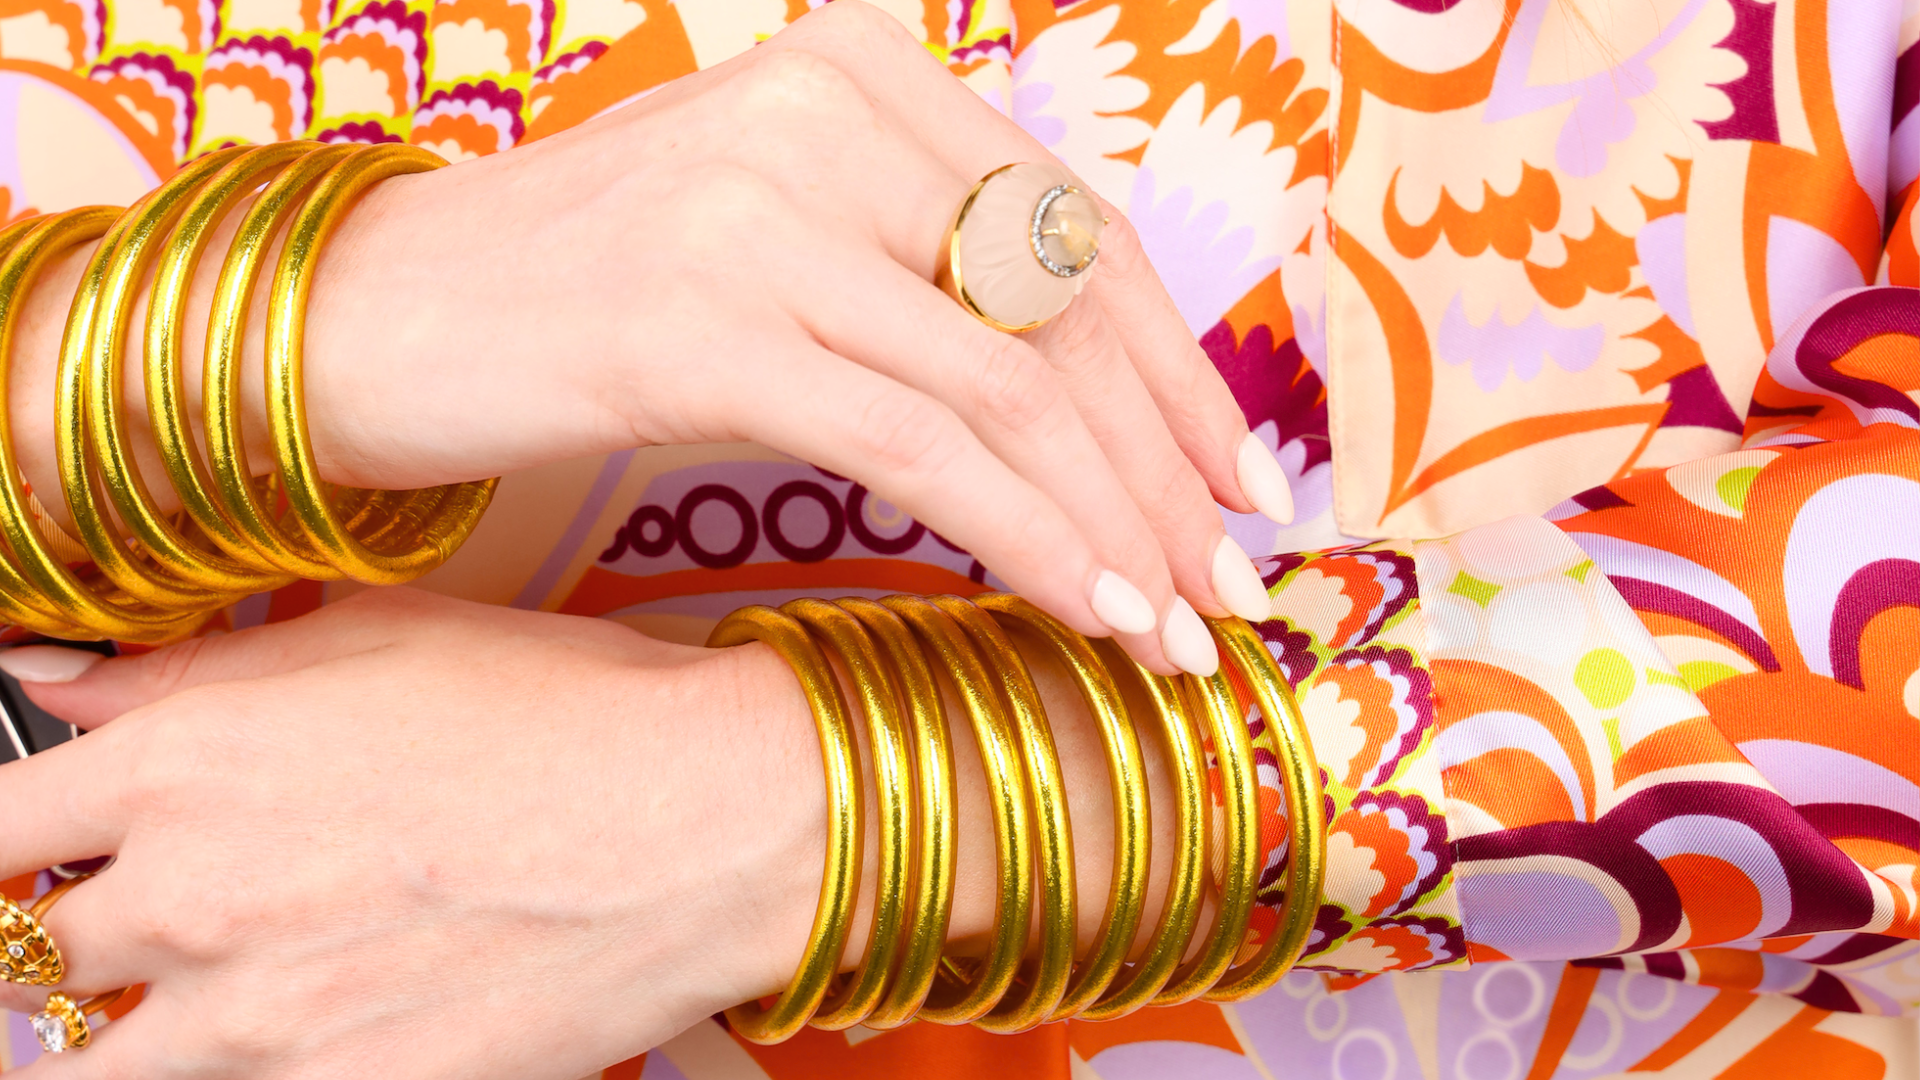 BuDhaGirl - Home of All Weather Bangles®